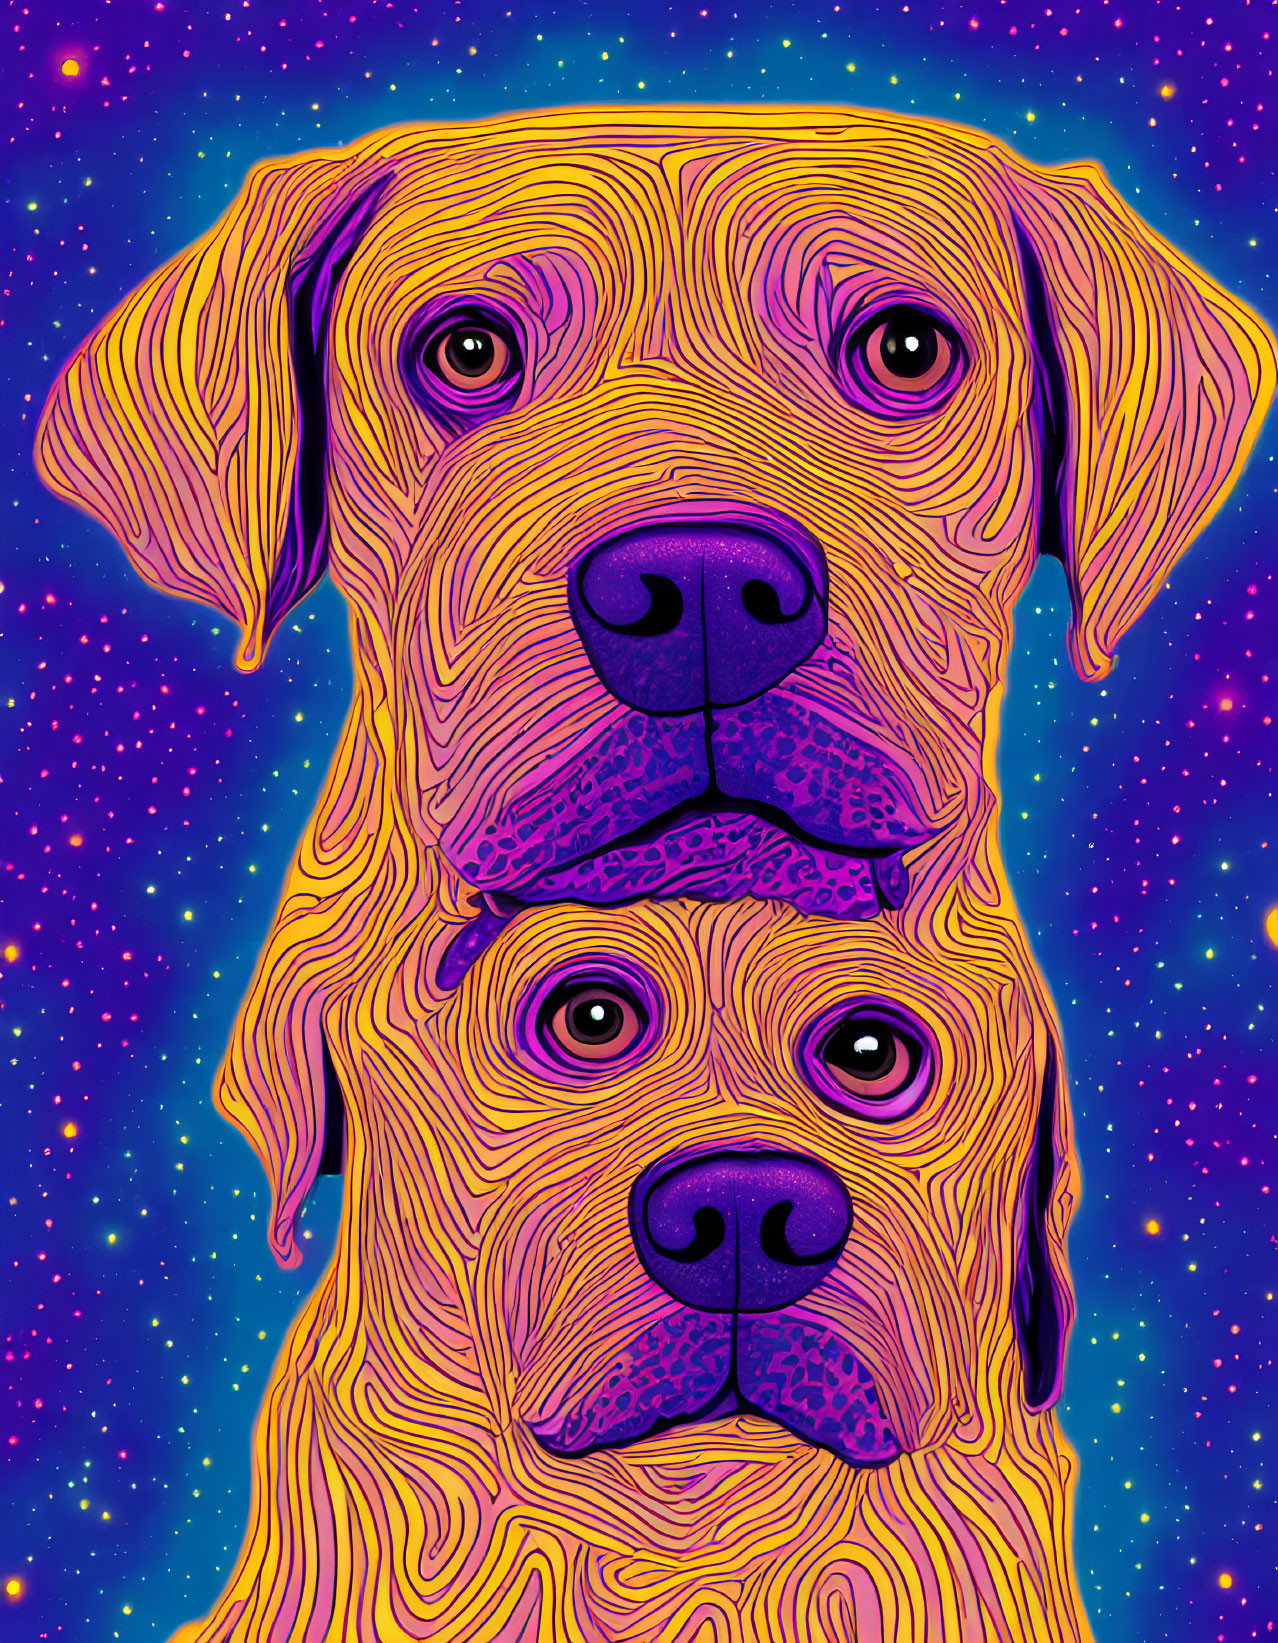 Vibrant dual dogs illustration on starry background